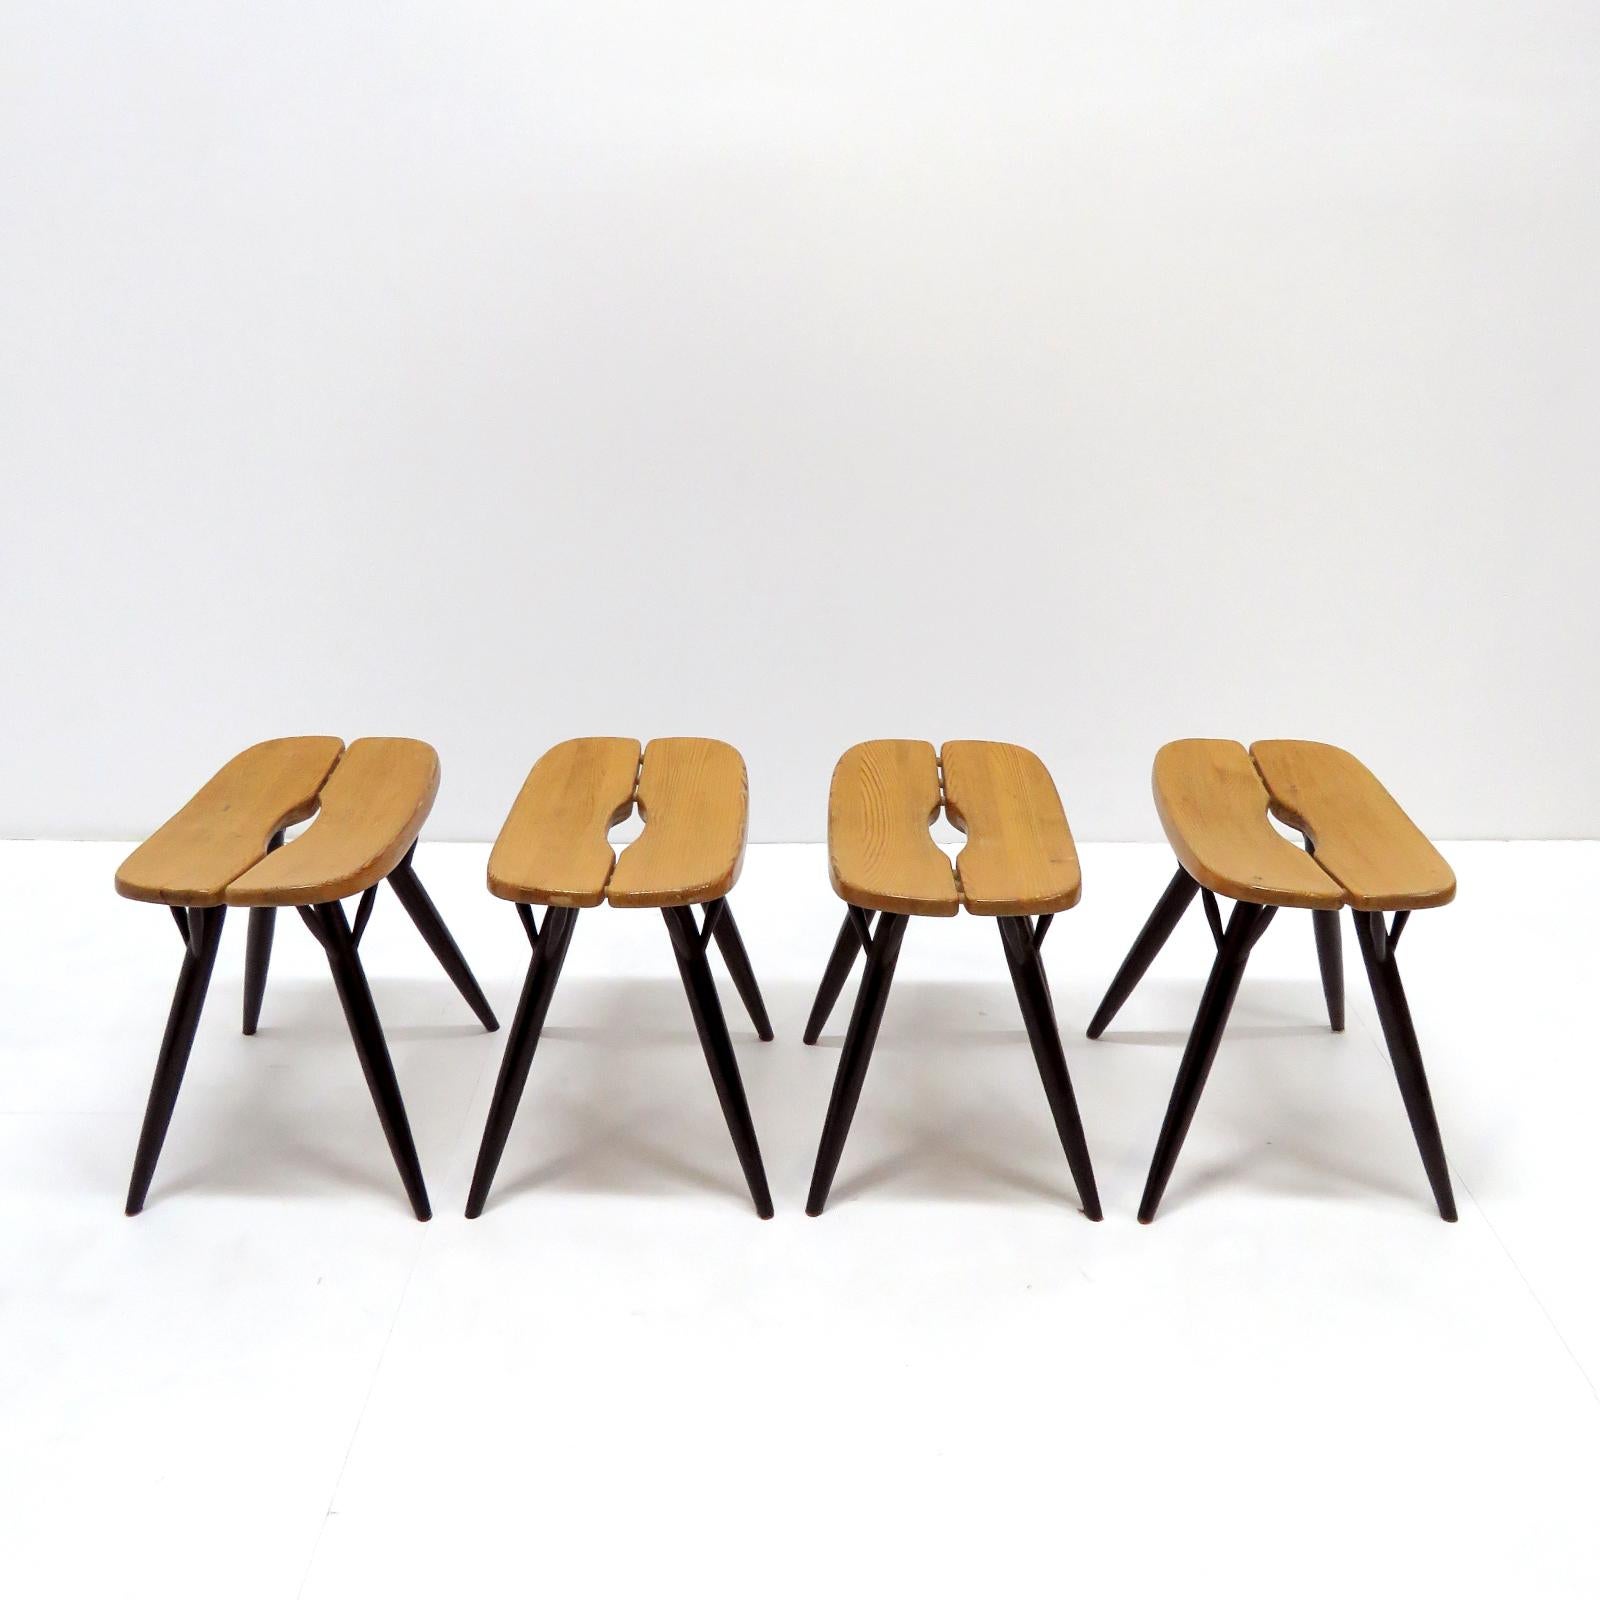 Wonderful stools designed by Ilmari Tapiovaara for Laukaan Puu, Finland 1955 in pinewood and black lacquered dowel legs, marked (see LU848715051422 for the matching table). Priced individually.